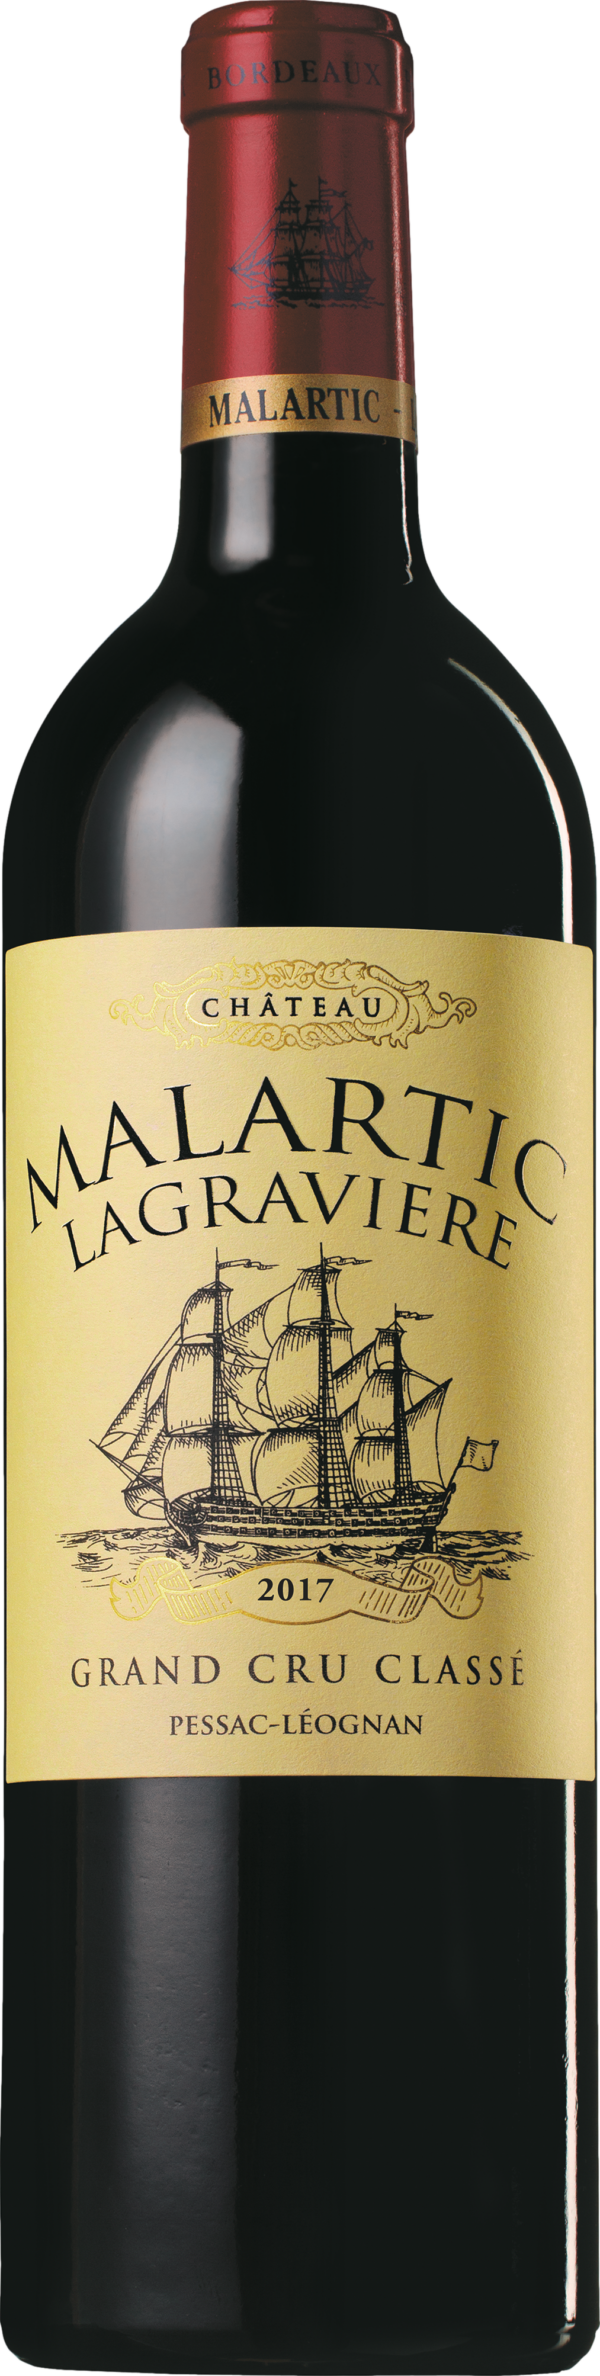 Product image of Chateau Malartic Lagraviere 2019 from 8wines